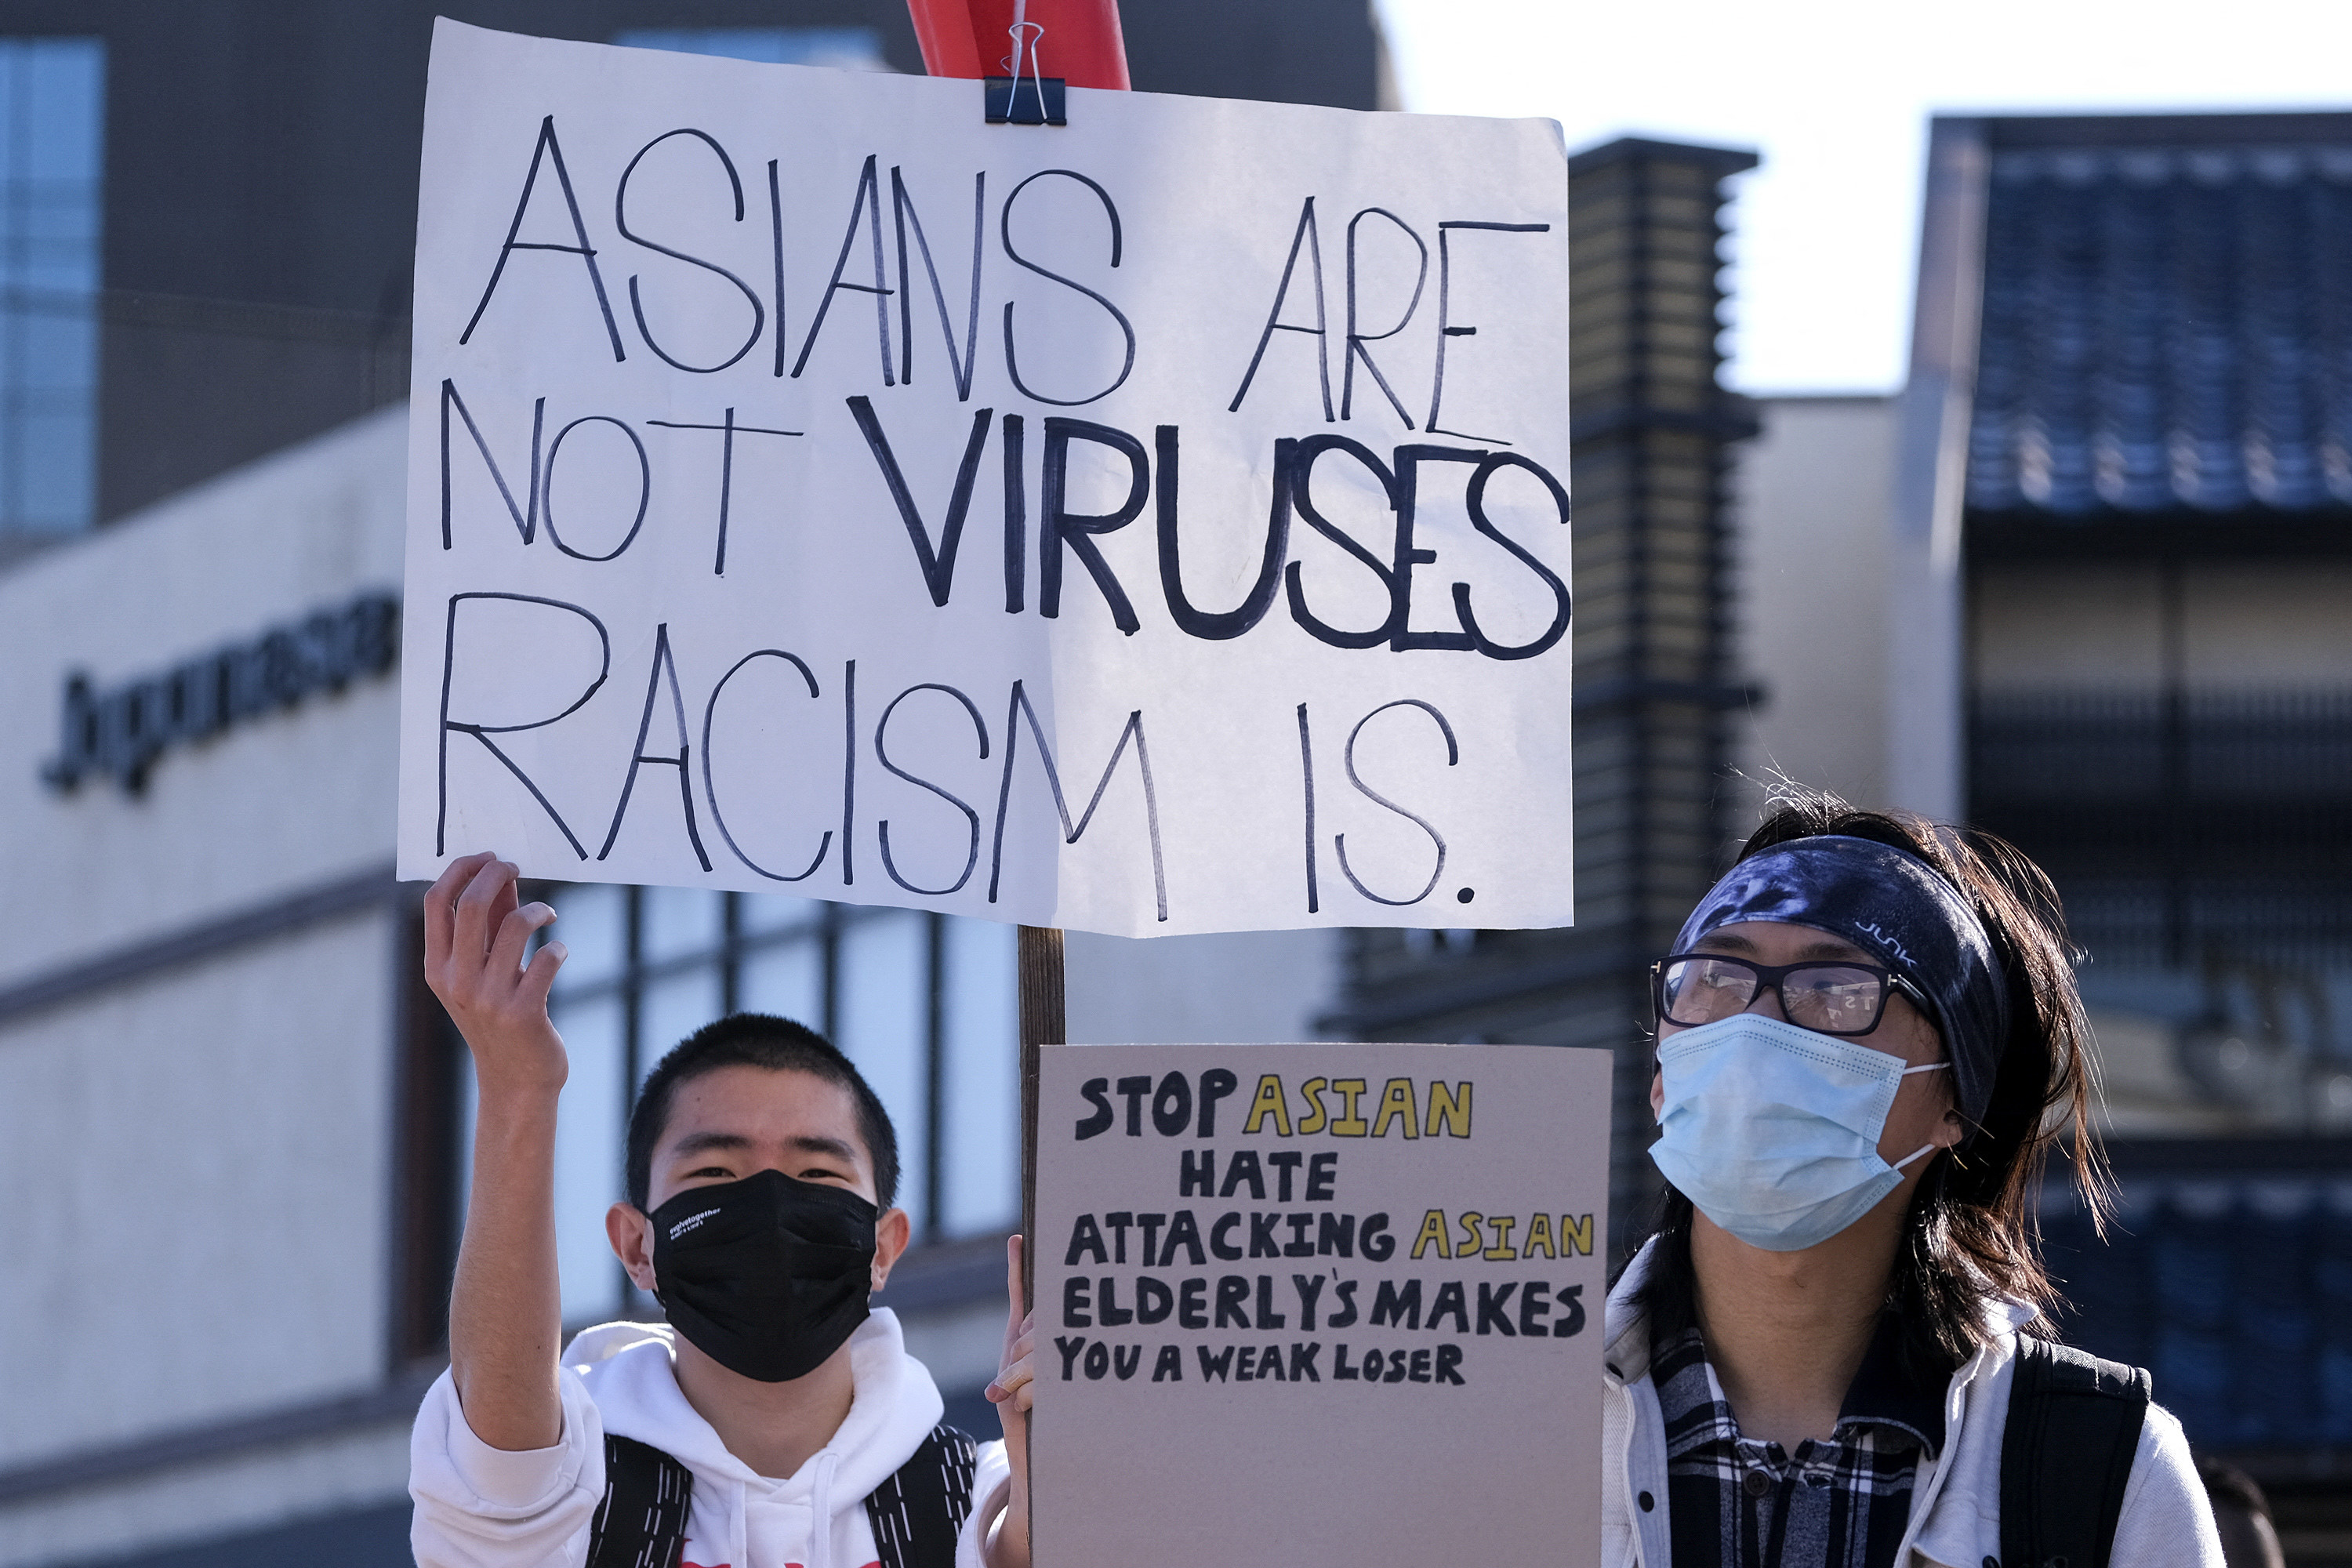 A man holds a sign reading &quot;Asians are not viruses, Racism is&quot; while a woman holds a sign reading &quot;stop Asian hate, attacking Asian elderlies makes you a weak loser&quot;